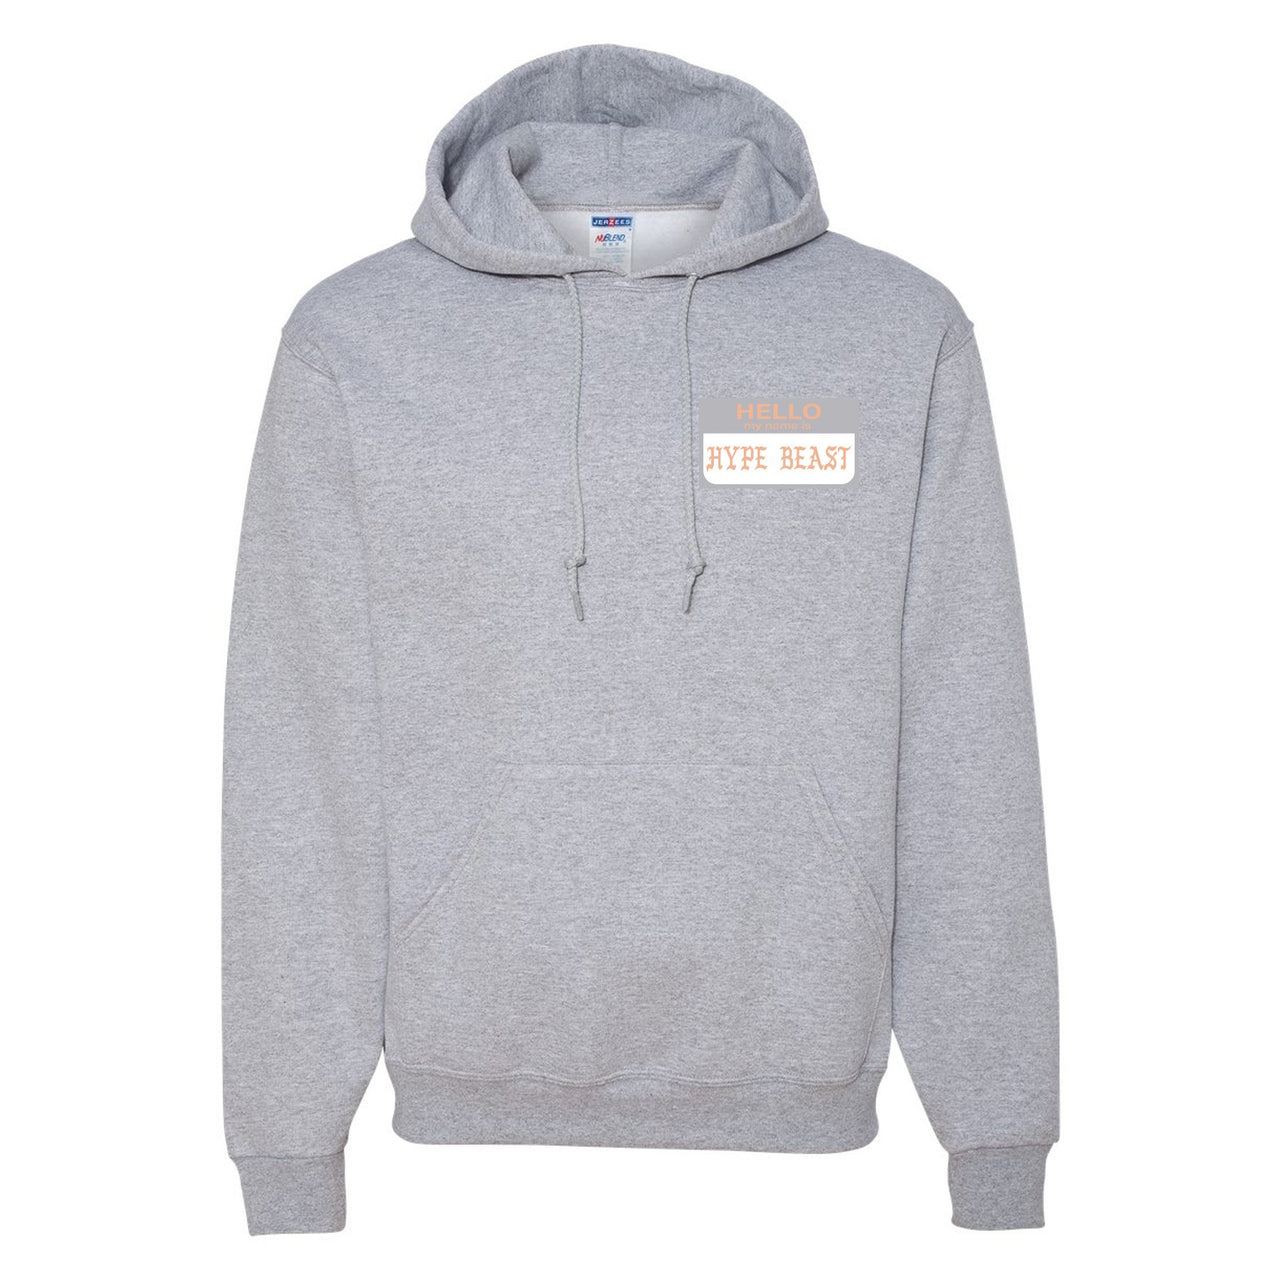 True Form v2 350s Hoodie | Hello My Name Is Hype Beast Pablo, Heathered Light Gray